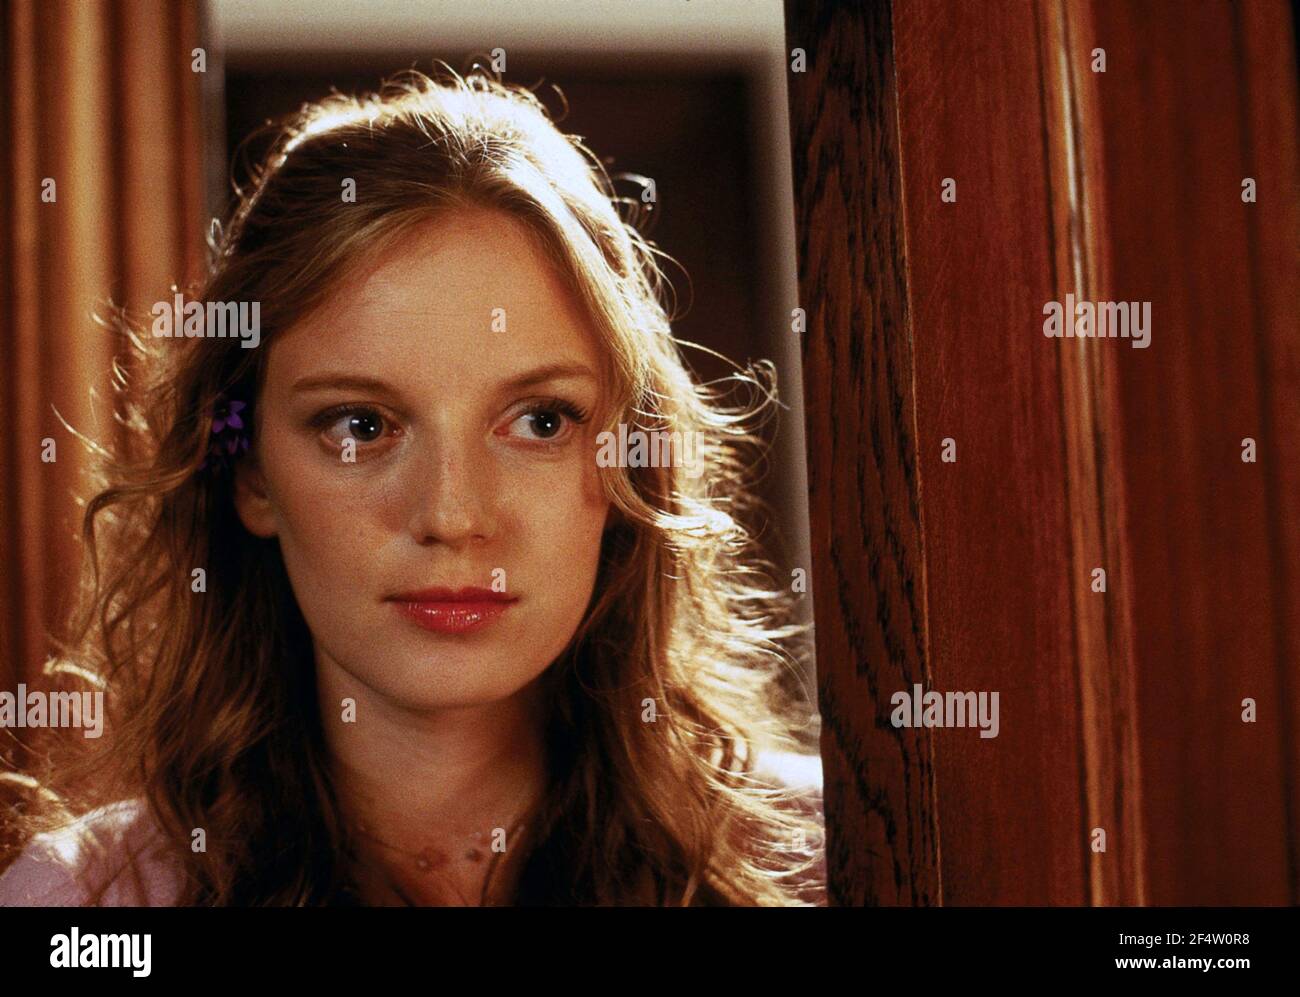 SARAH POLLEY in THE I INSIDE (2004), directed by ROLAND SUSO RICHTER. Credit: MIRAMAX / Album Stock Photo